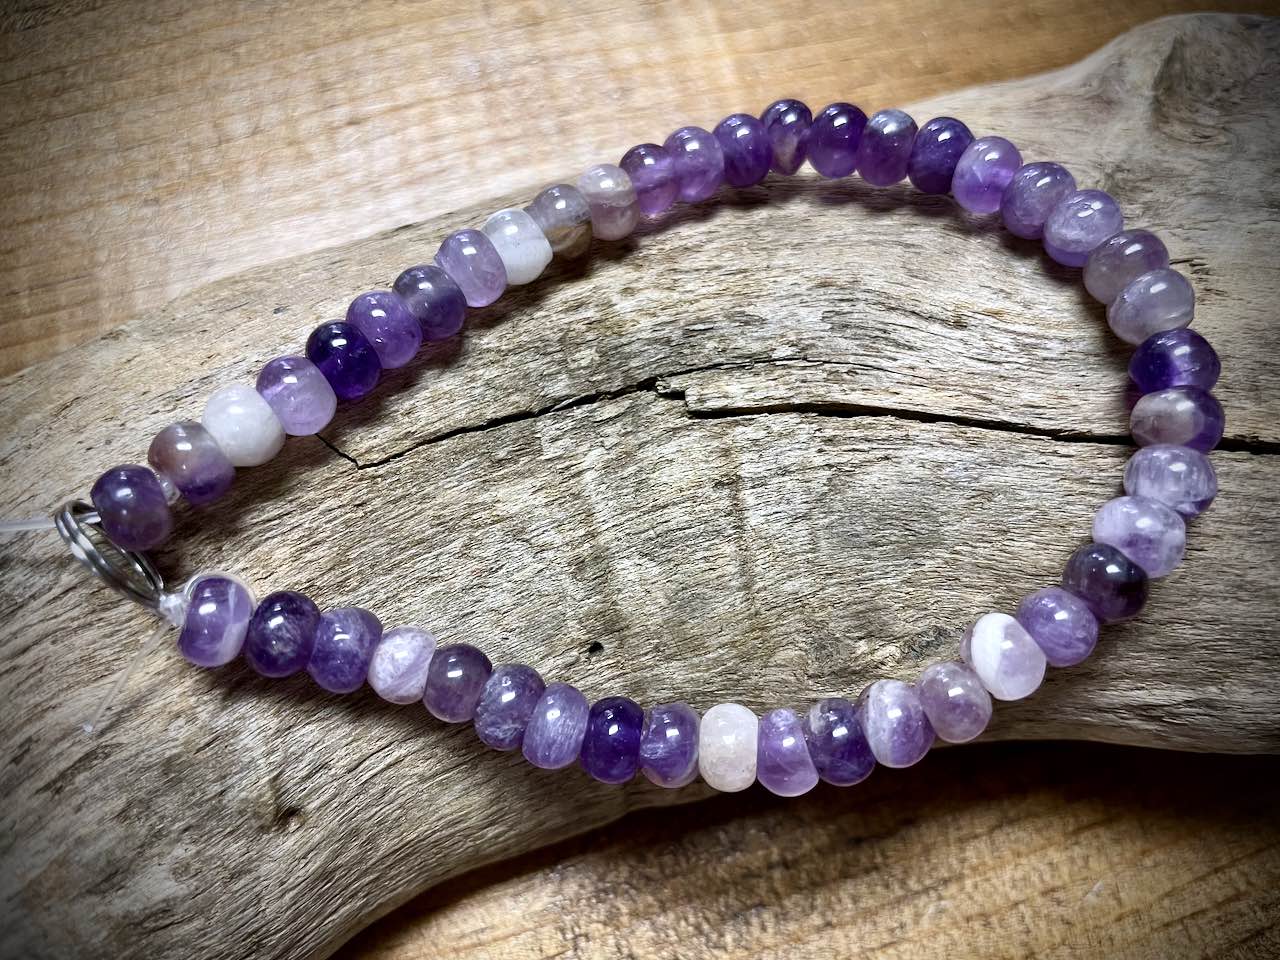 Amethyst Smooth Rondelle Beads - 6mm x 4mm - 8”